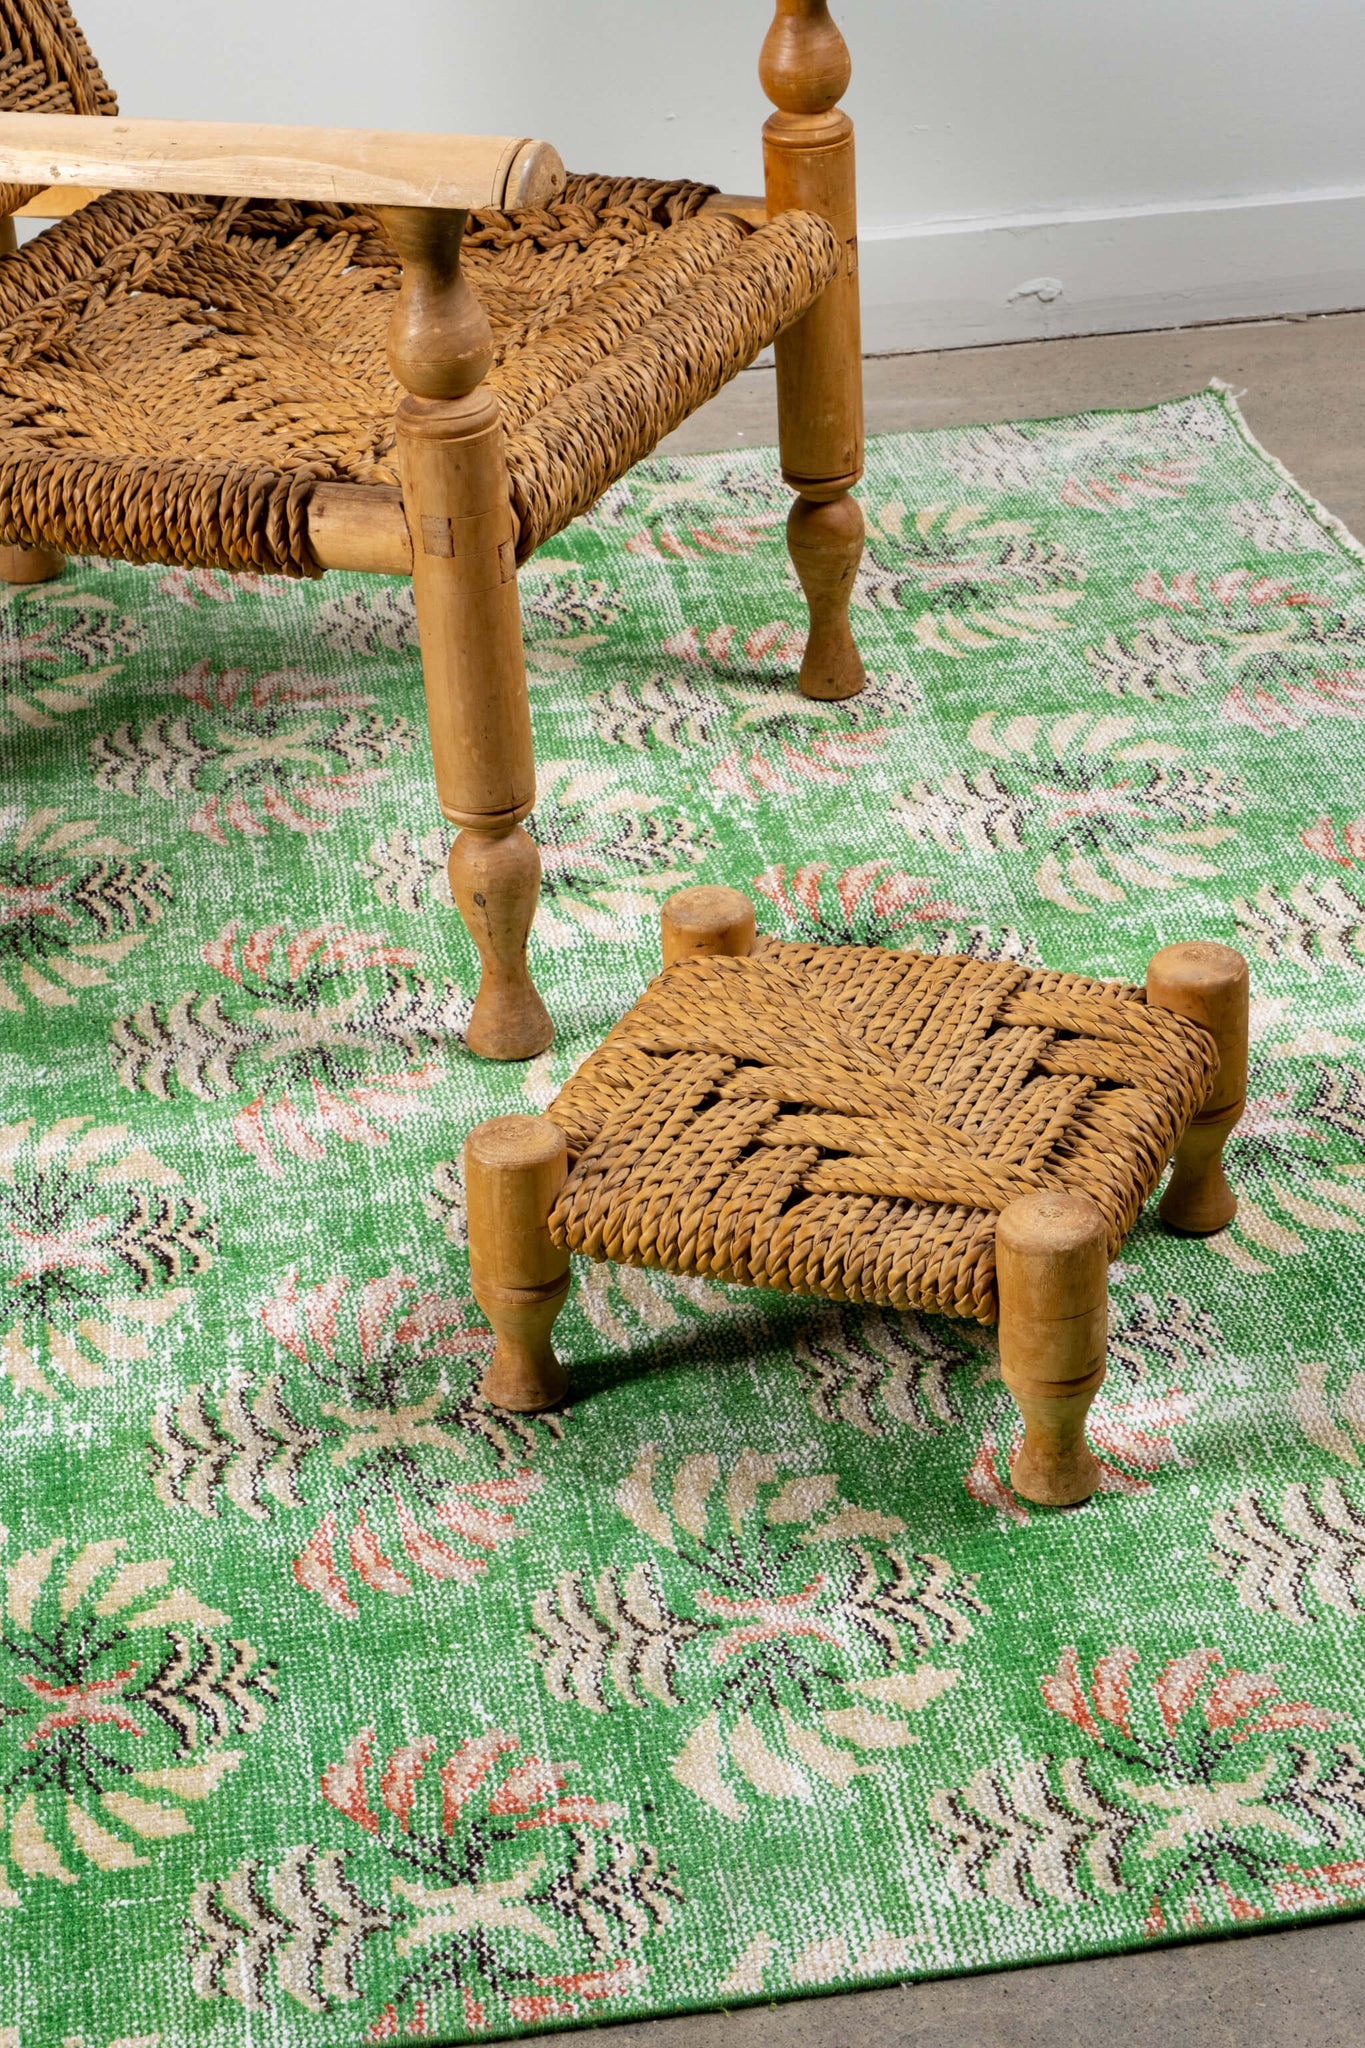 Vintage French Wood and Rope Armchairs with Footstools Adrien Audoux and Frida Minet, shown on rug